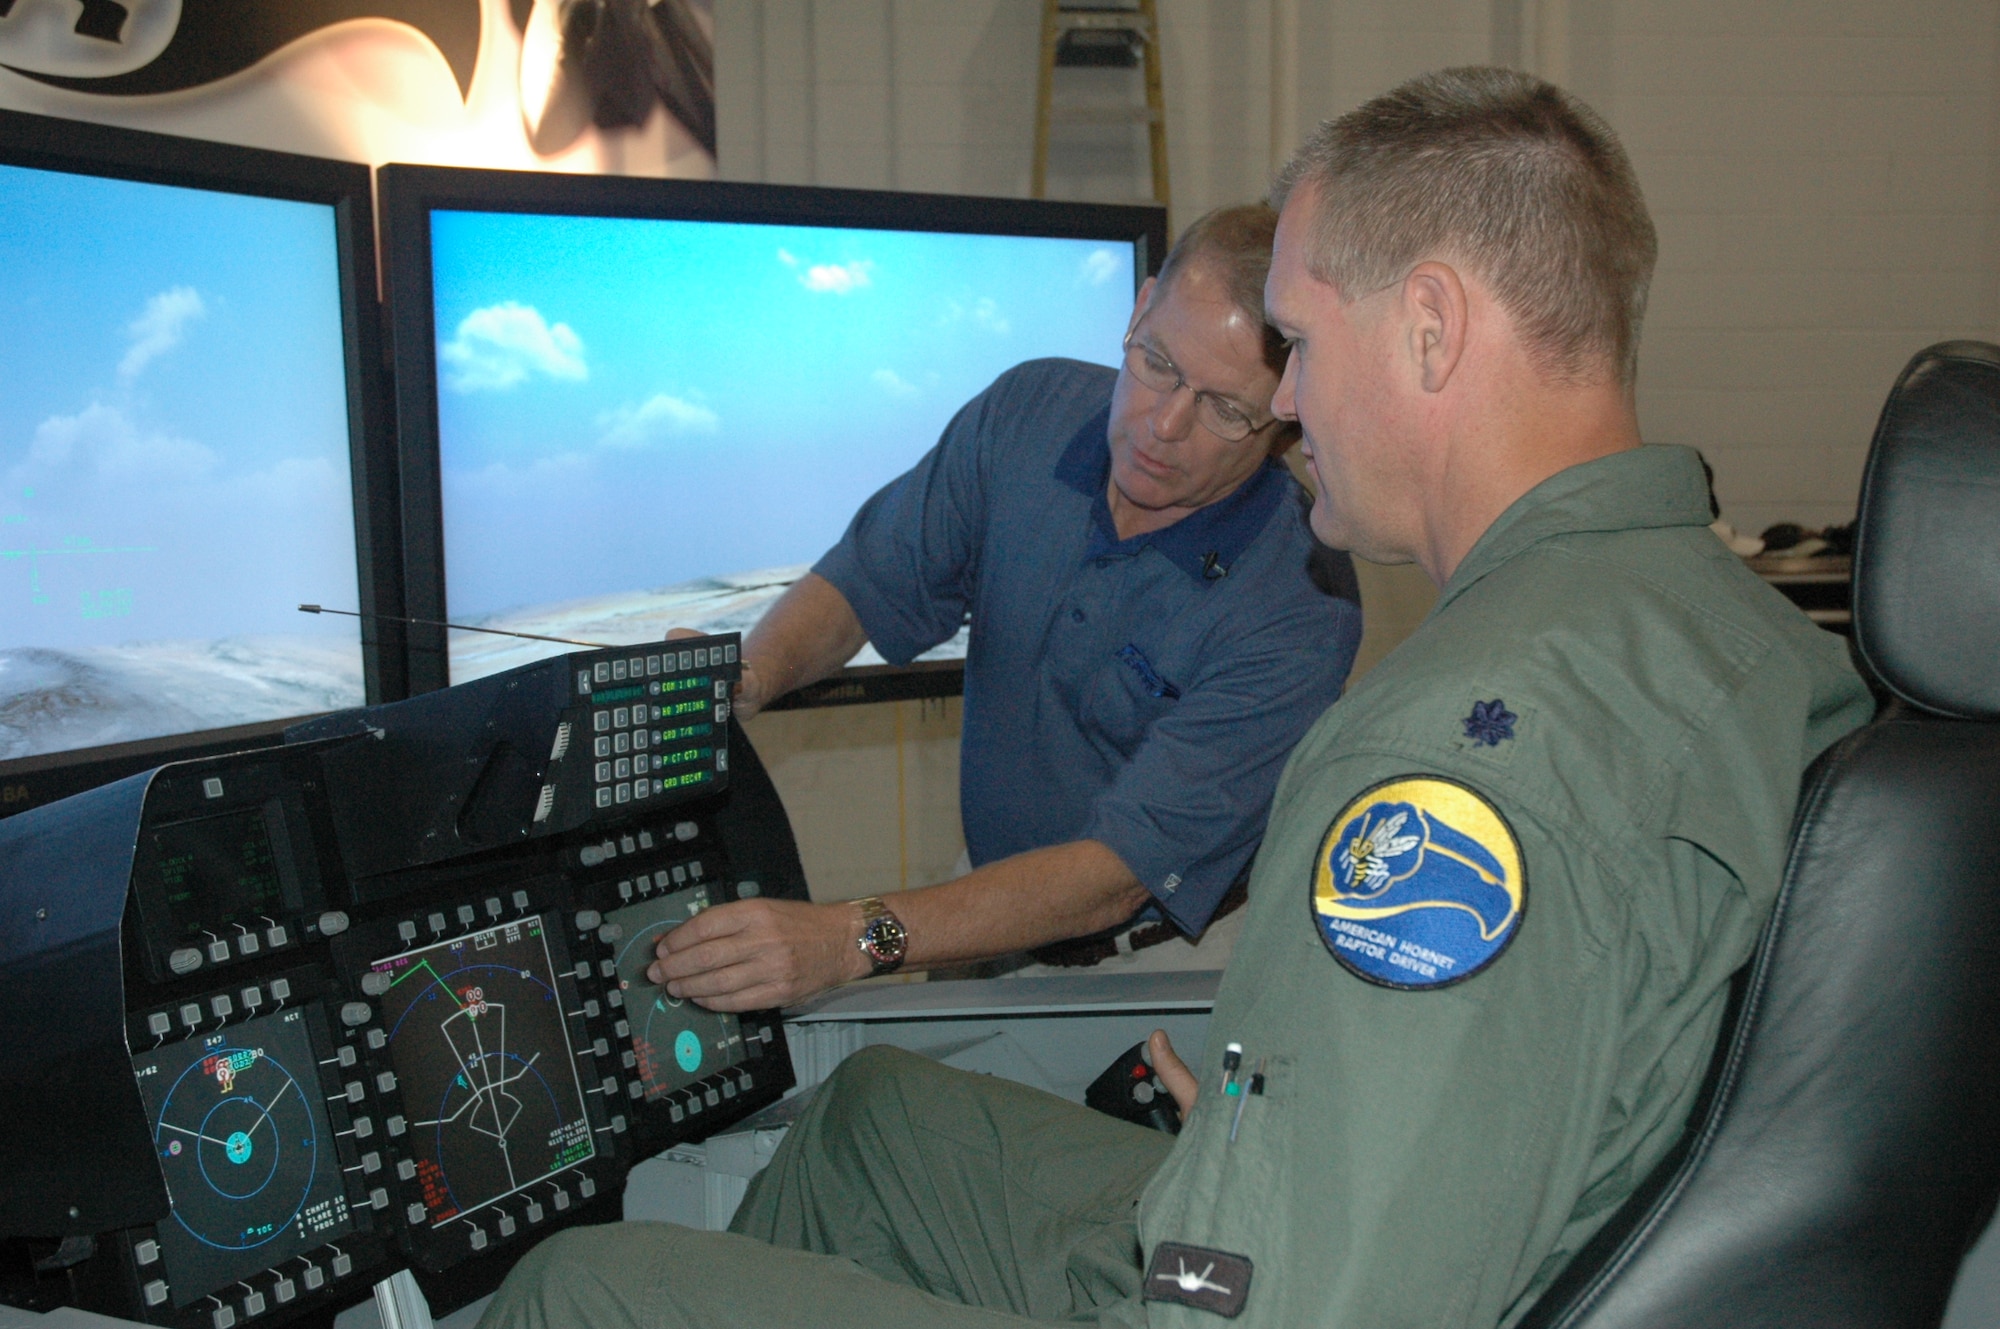 Lt. Col. Tom Kafka, 43rd Fighter Squadron assistant director of operations, demonstrates some of the F-22’s capabilities to local media in a declassified simulator set up by Lockheed Martin in preparation for a red carpet tour here today. The tour was in celebration of the first F-22 basic-course graduation. The graduation ceremony will be held at the Heritage Club Nov. 1. (U.S. Air Force photo/Staff Sgt. Vesta M. Anderson)